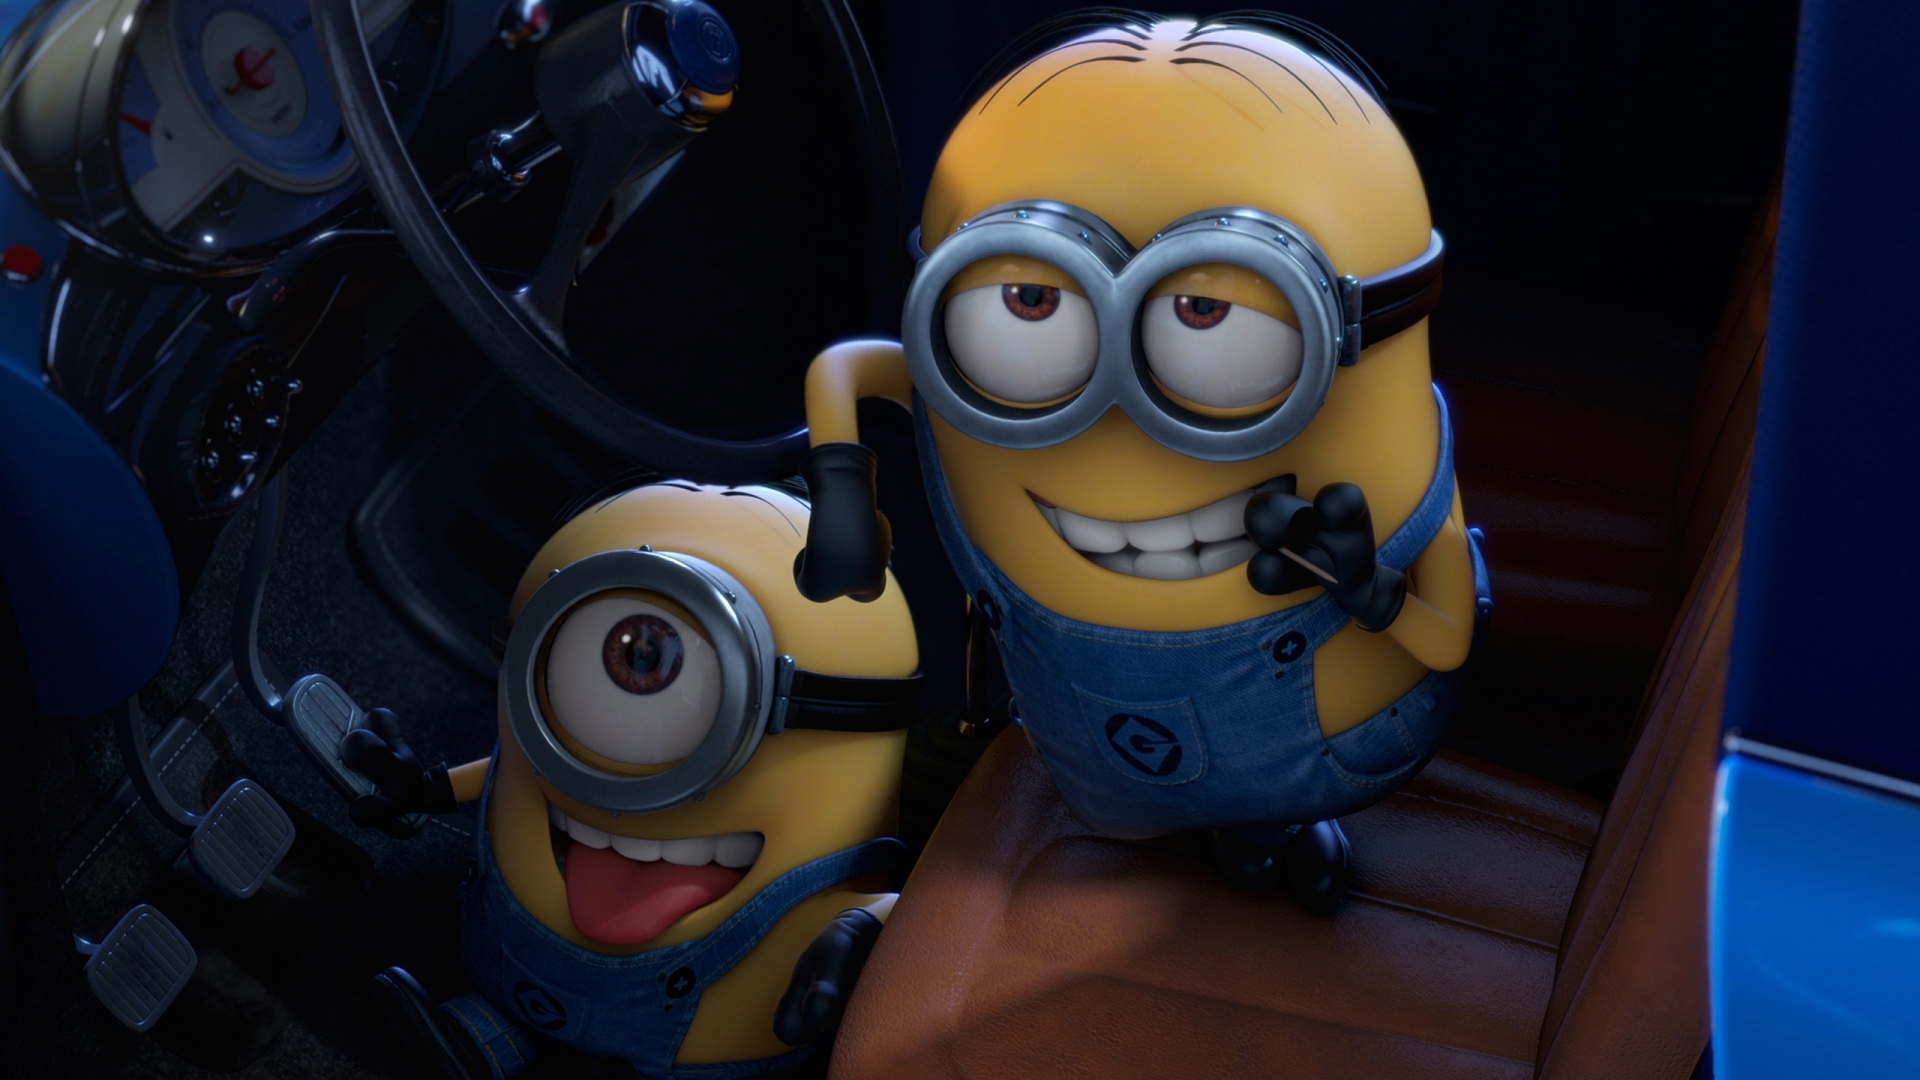 Minions for 1920 x 1080 HDTV 1080p resolution